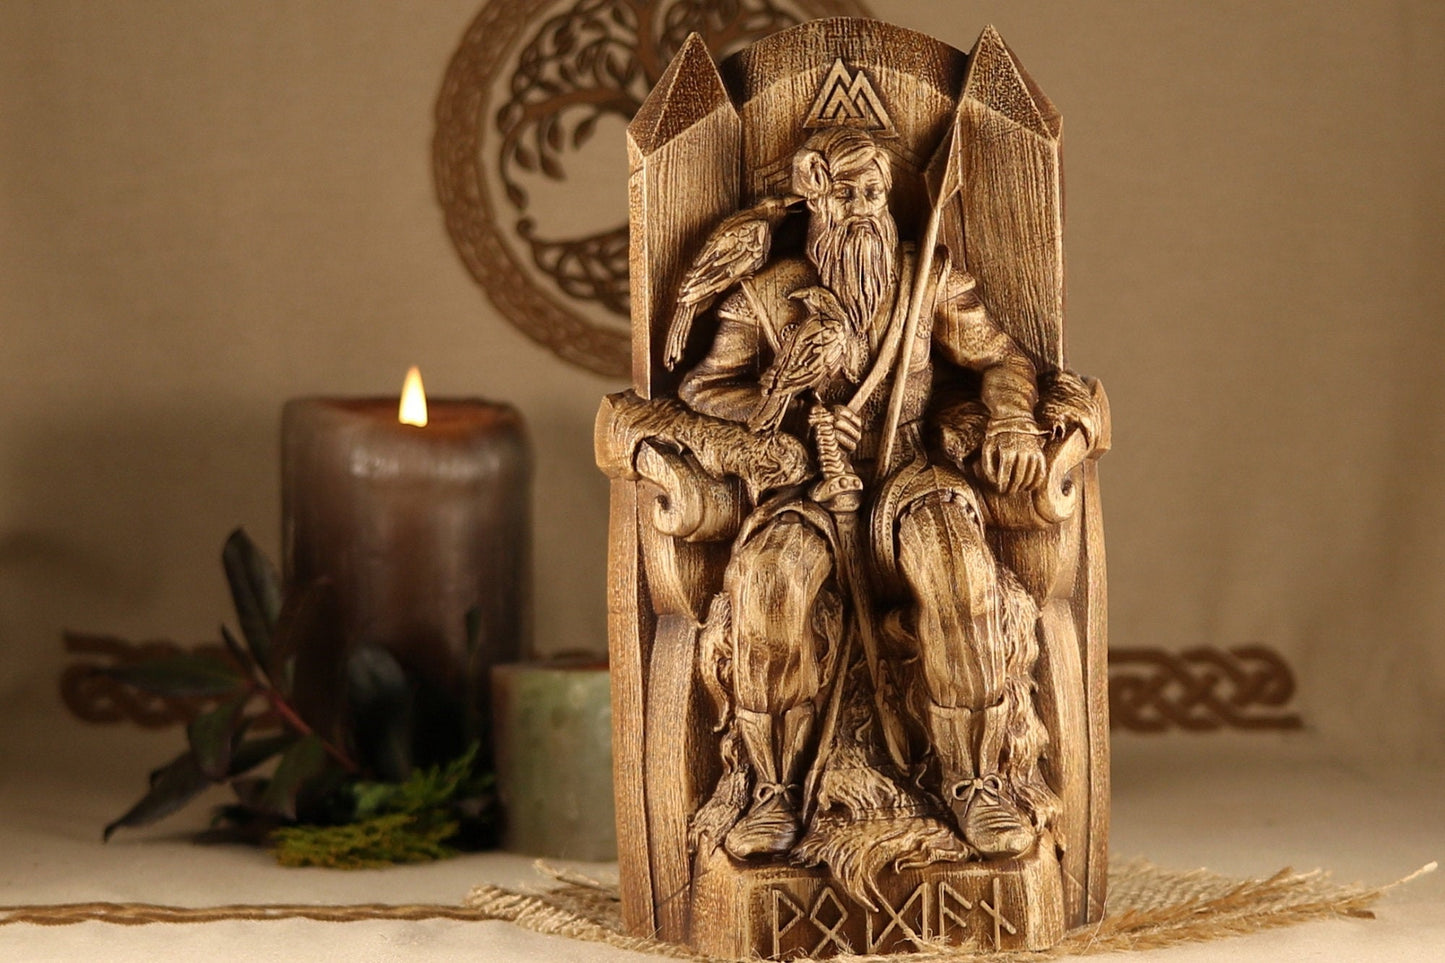 Wooden Odin Statue - Wood Carving Statue